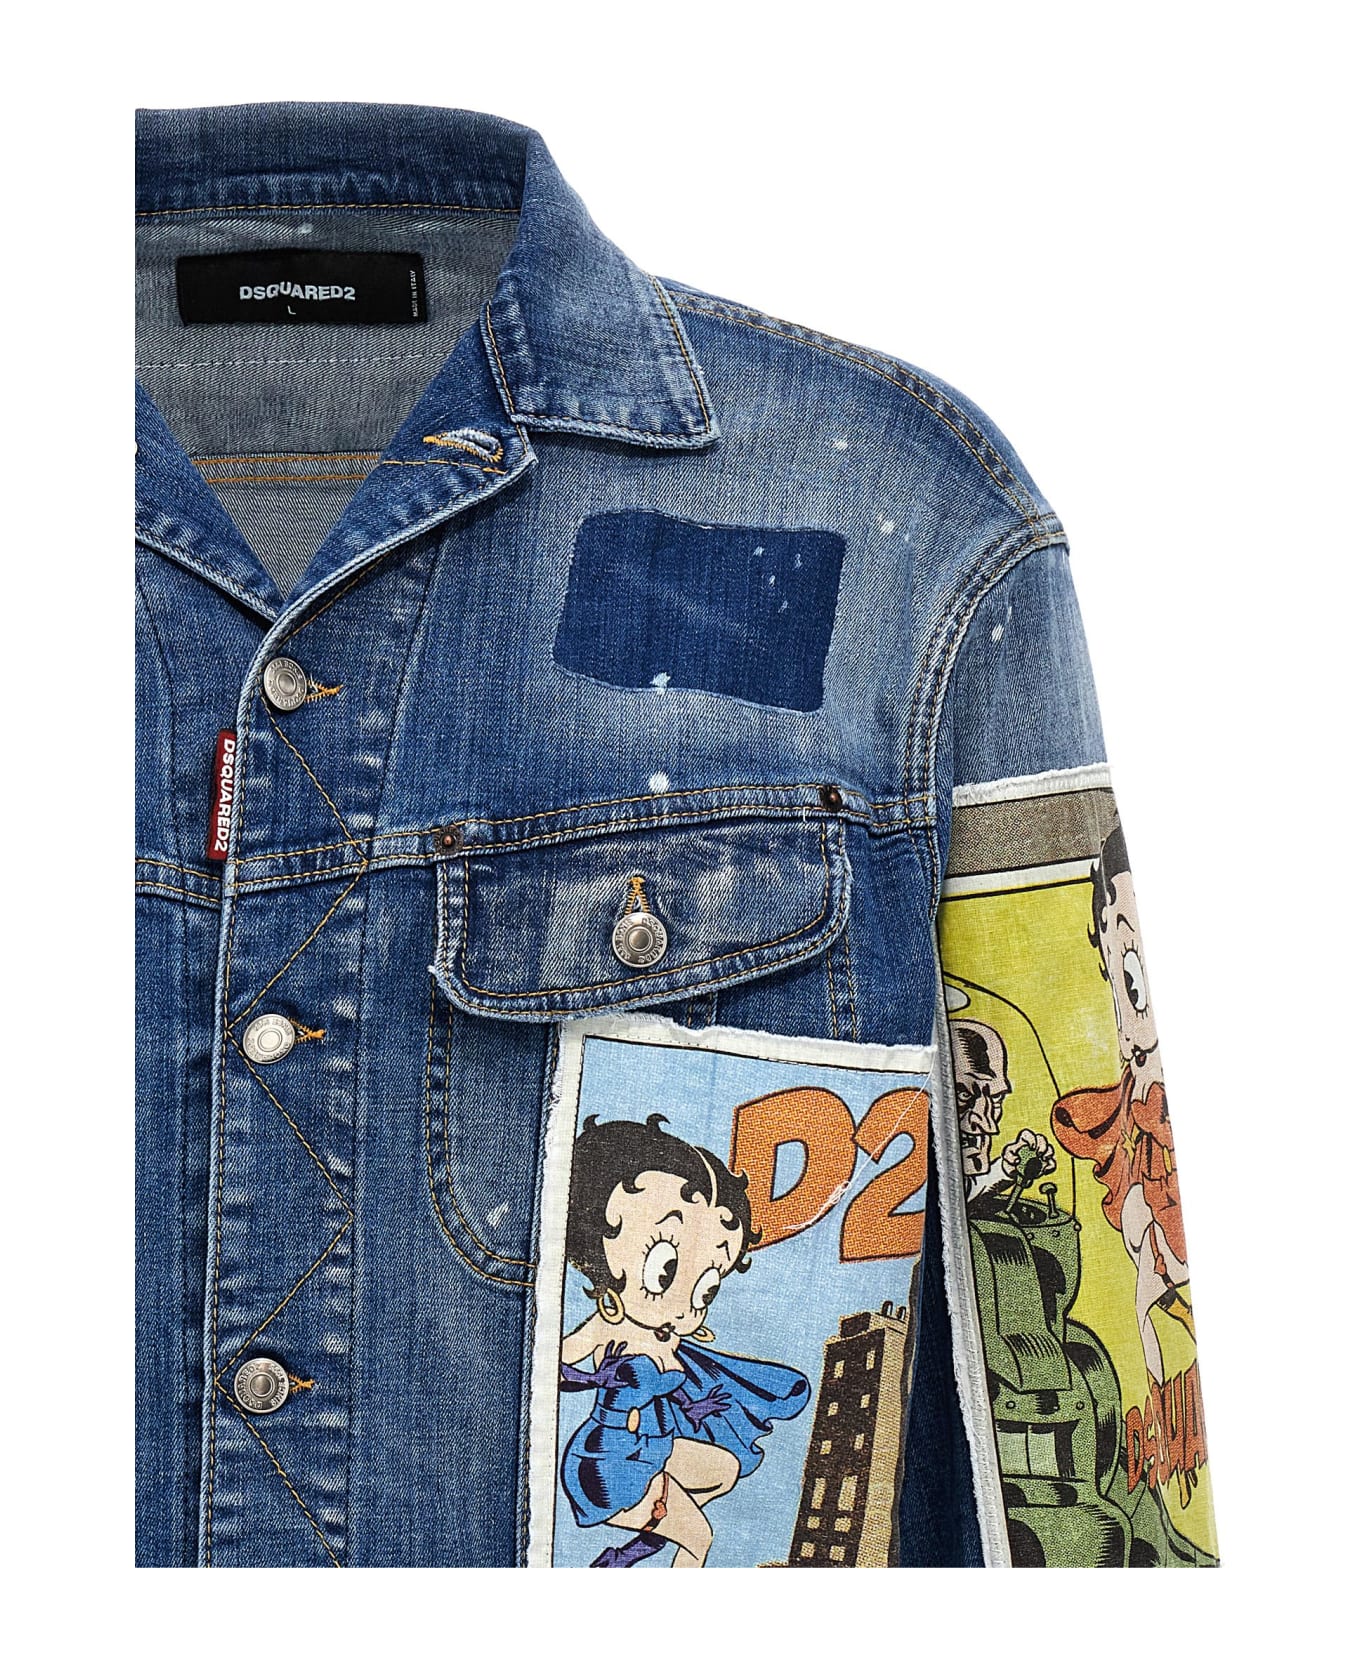 Dsquared2 'betty Boop' Jacket - Blue